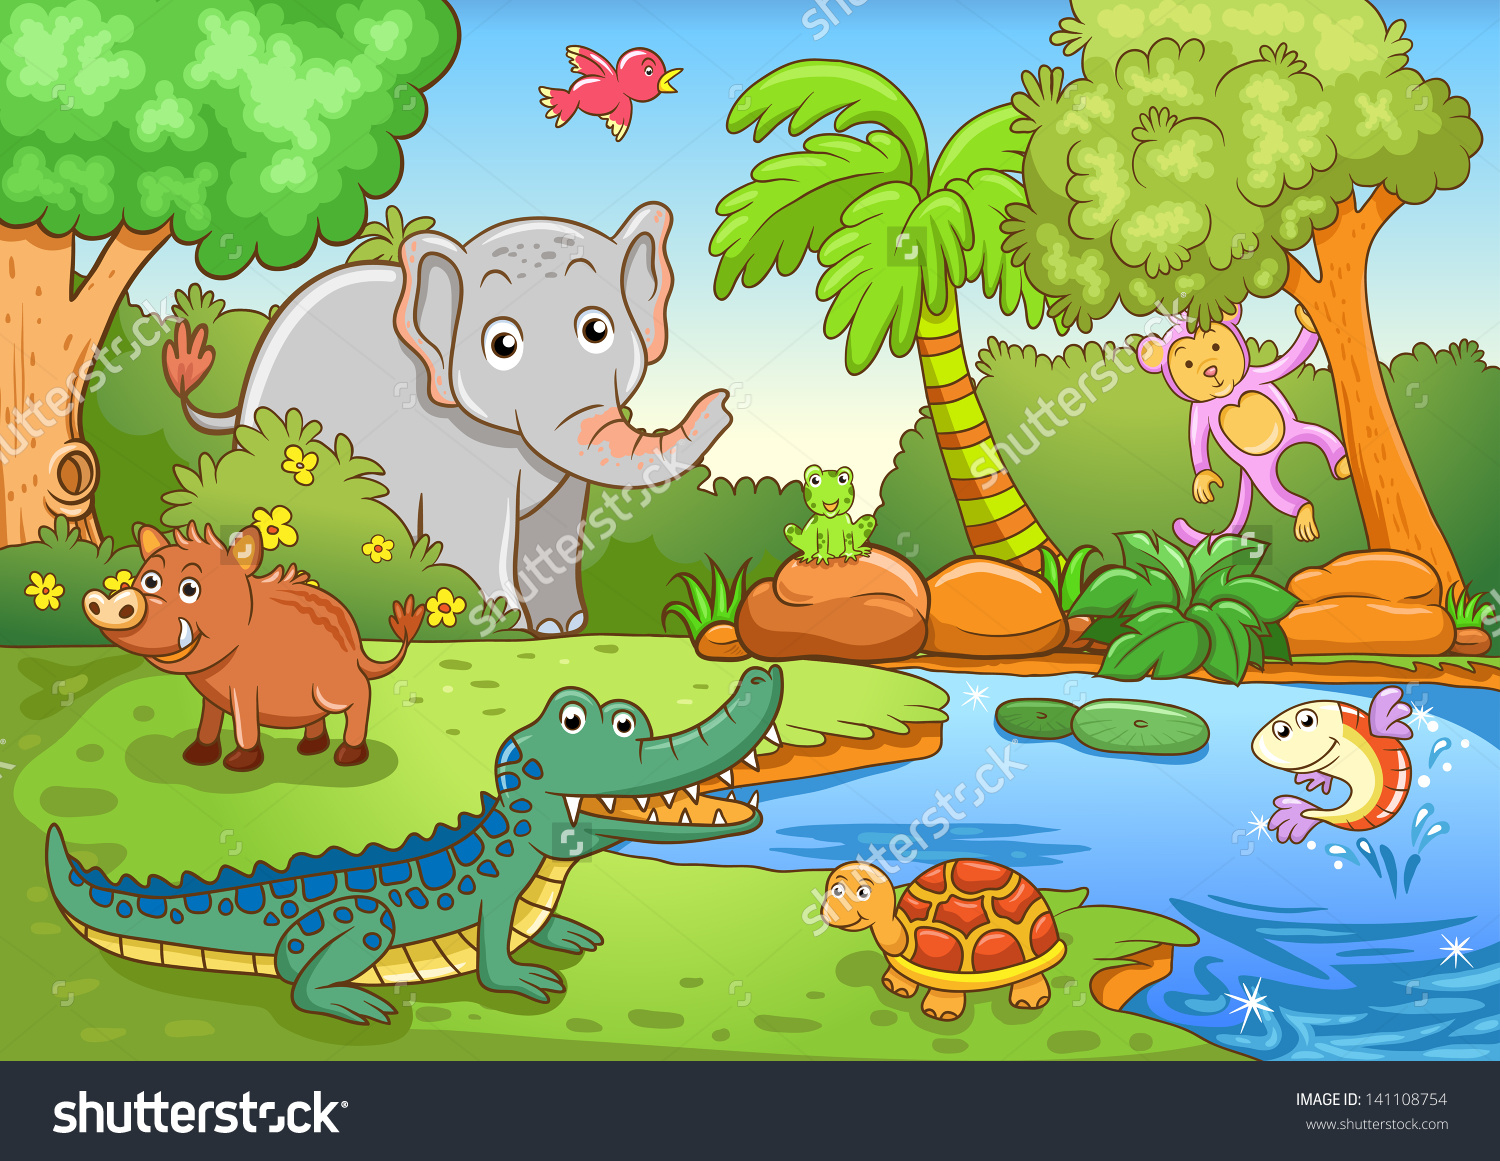 Rainforest Drawing With Animals Easy / Published on march 22, 2019